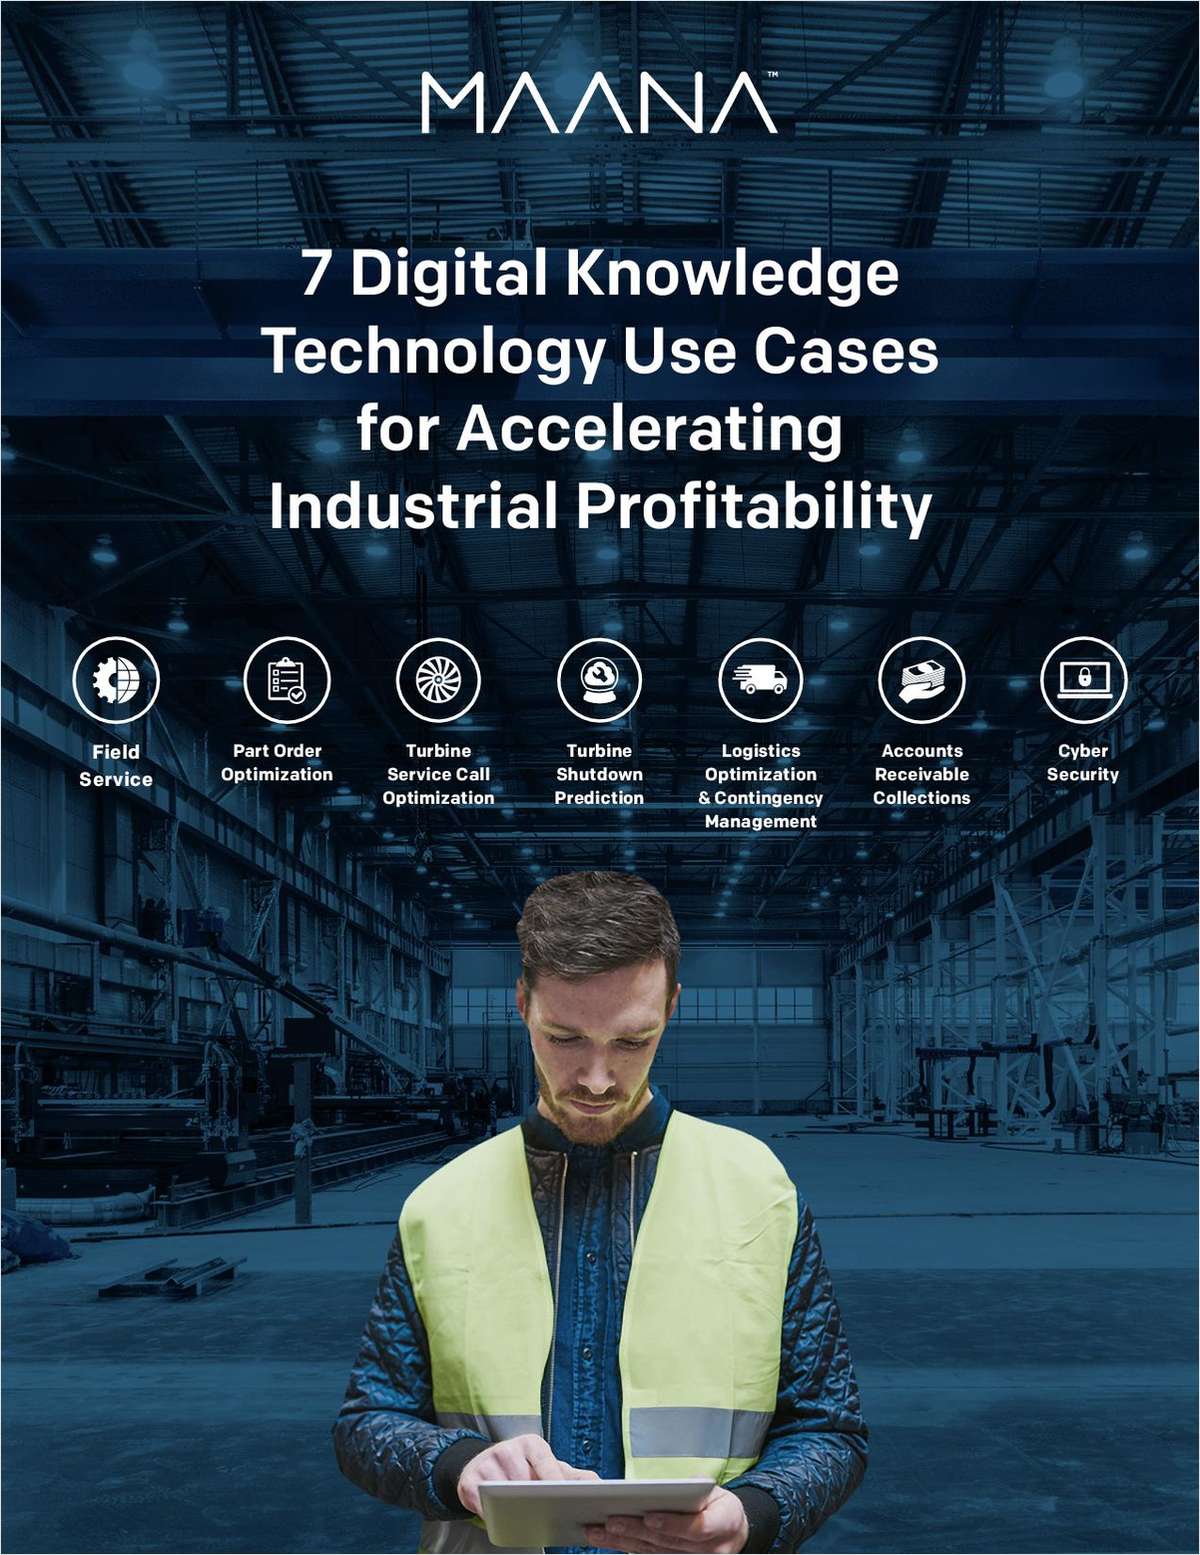 7 Use Cases of Digital Knowledge Technology for Accelerating Industrial Profitability